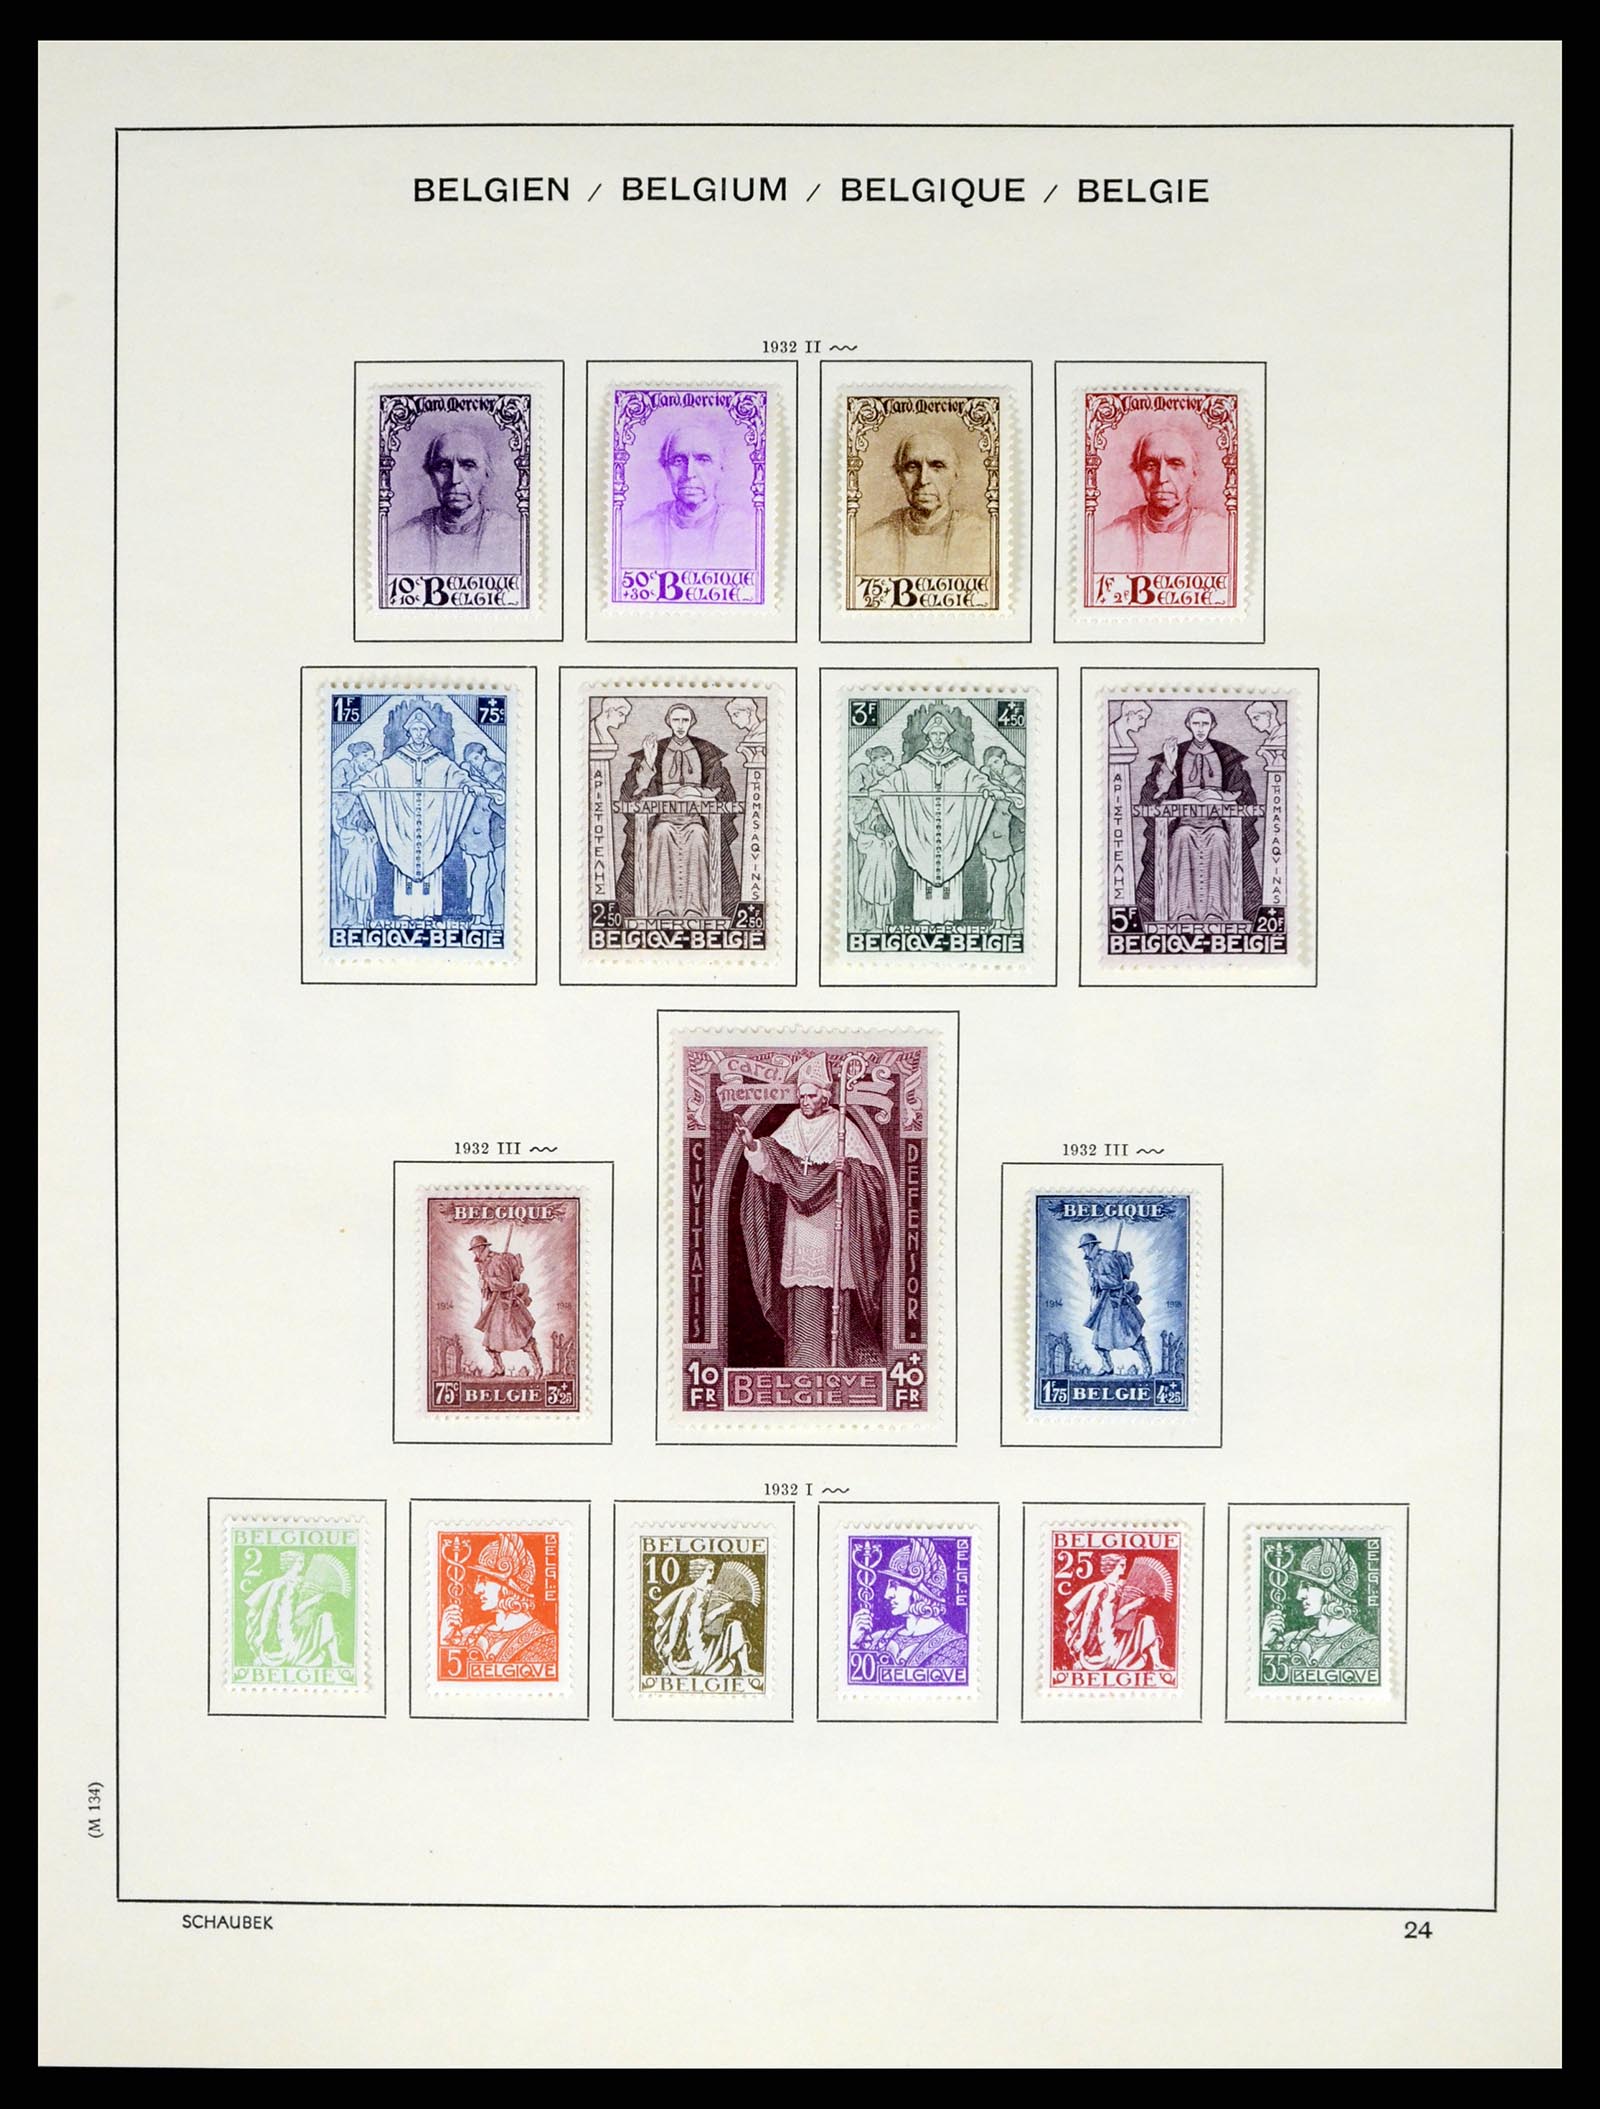 37595 021 - Stamp collection 37595 Super collection Belgium 1849-2015!